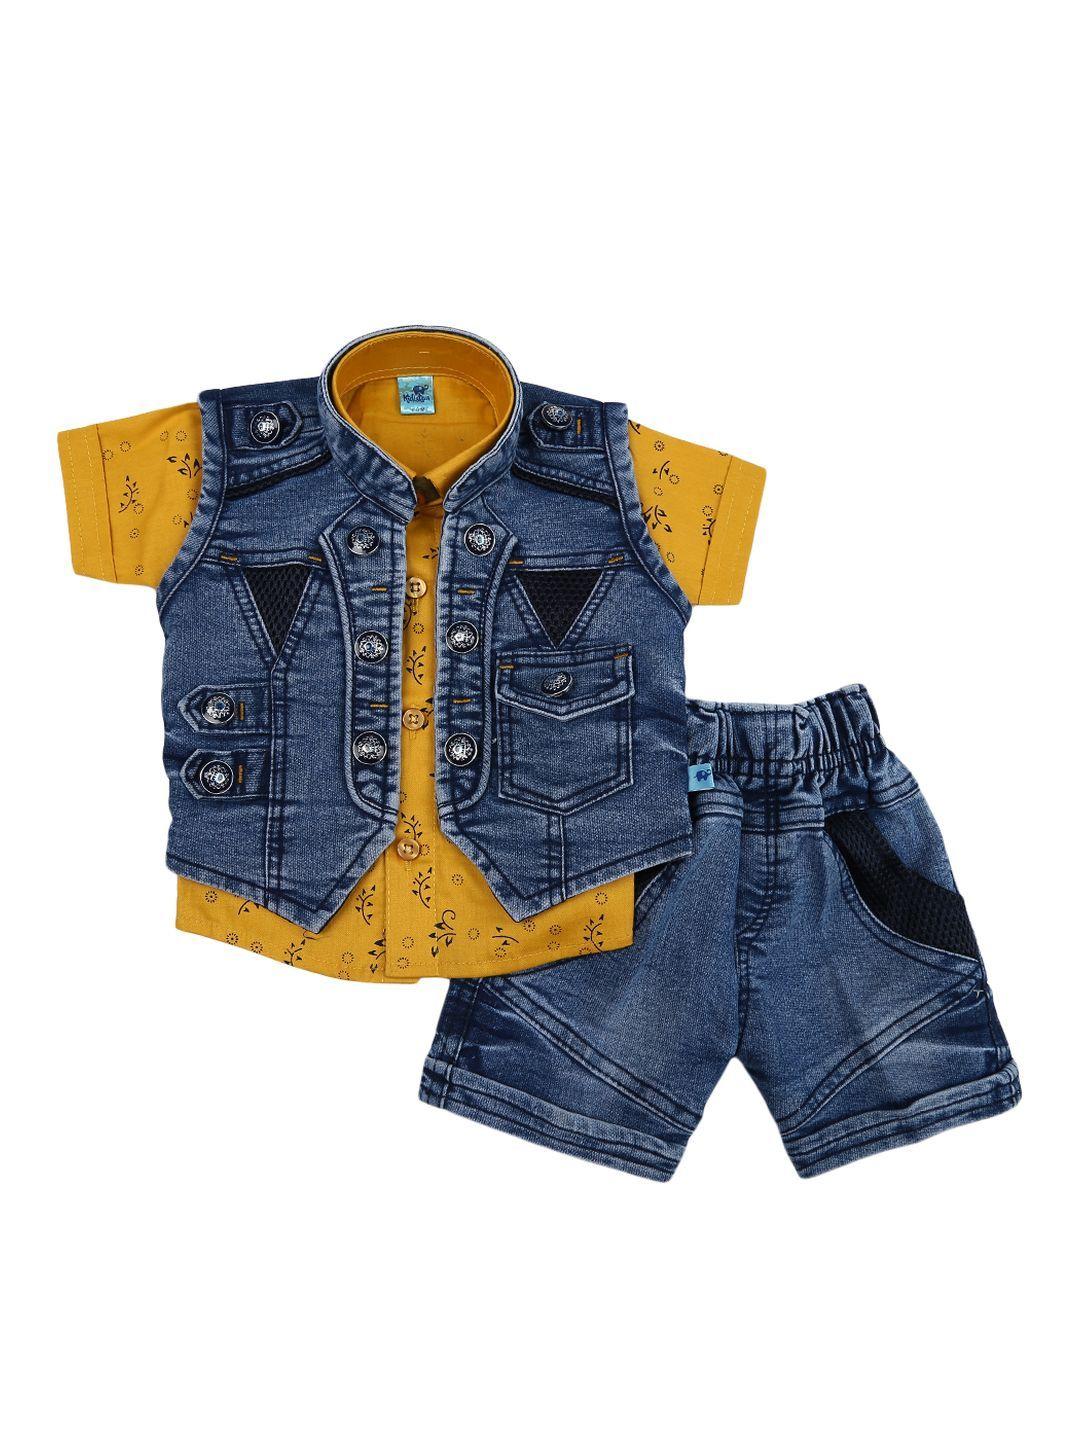 v-mart infant printed pure cotton shirt with shorts set